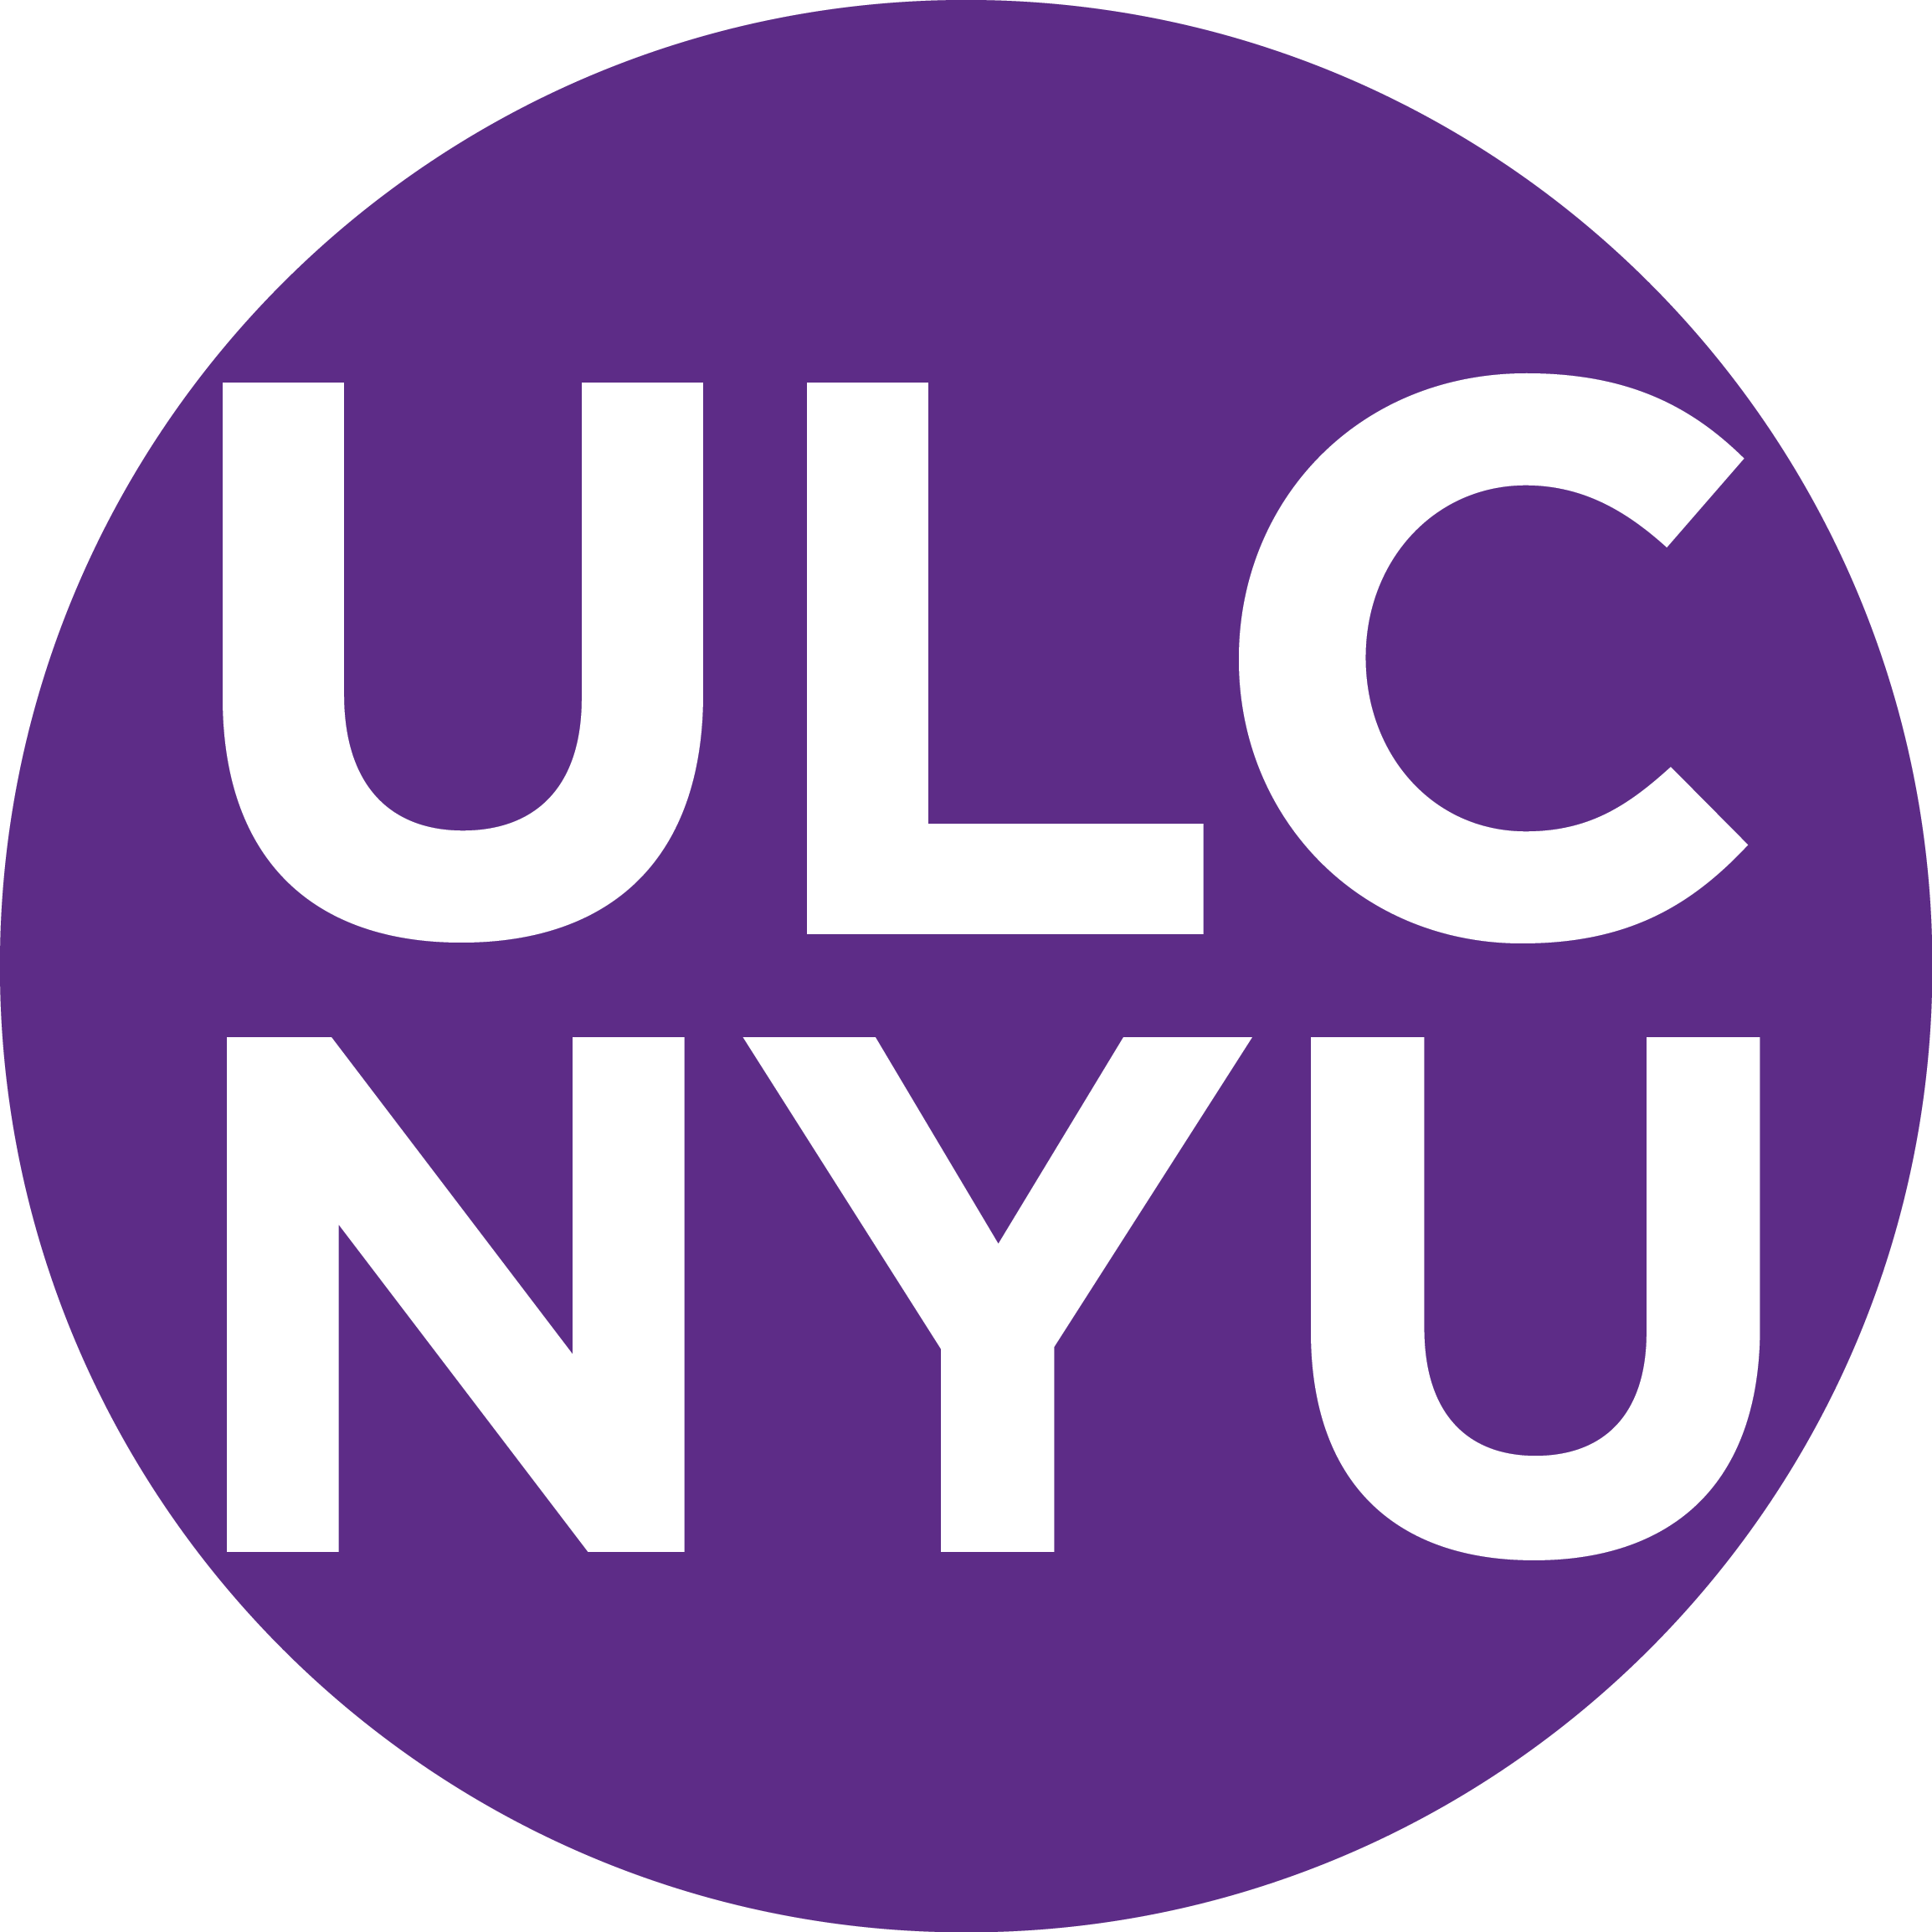 NYU University Learning Center (ULC) - An academic support center offering FREE PEER TUTORING and study tips for undergraduates at NYU.
http://t.co/1CLNxj79Uf